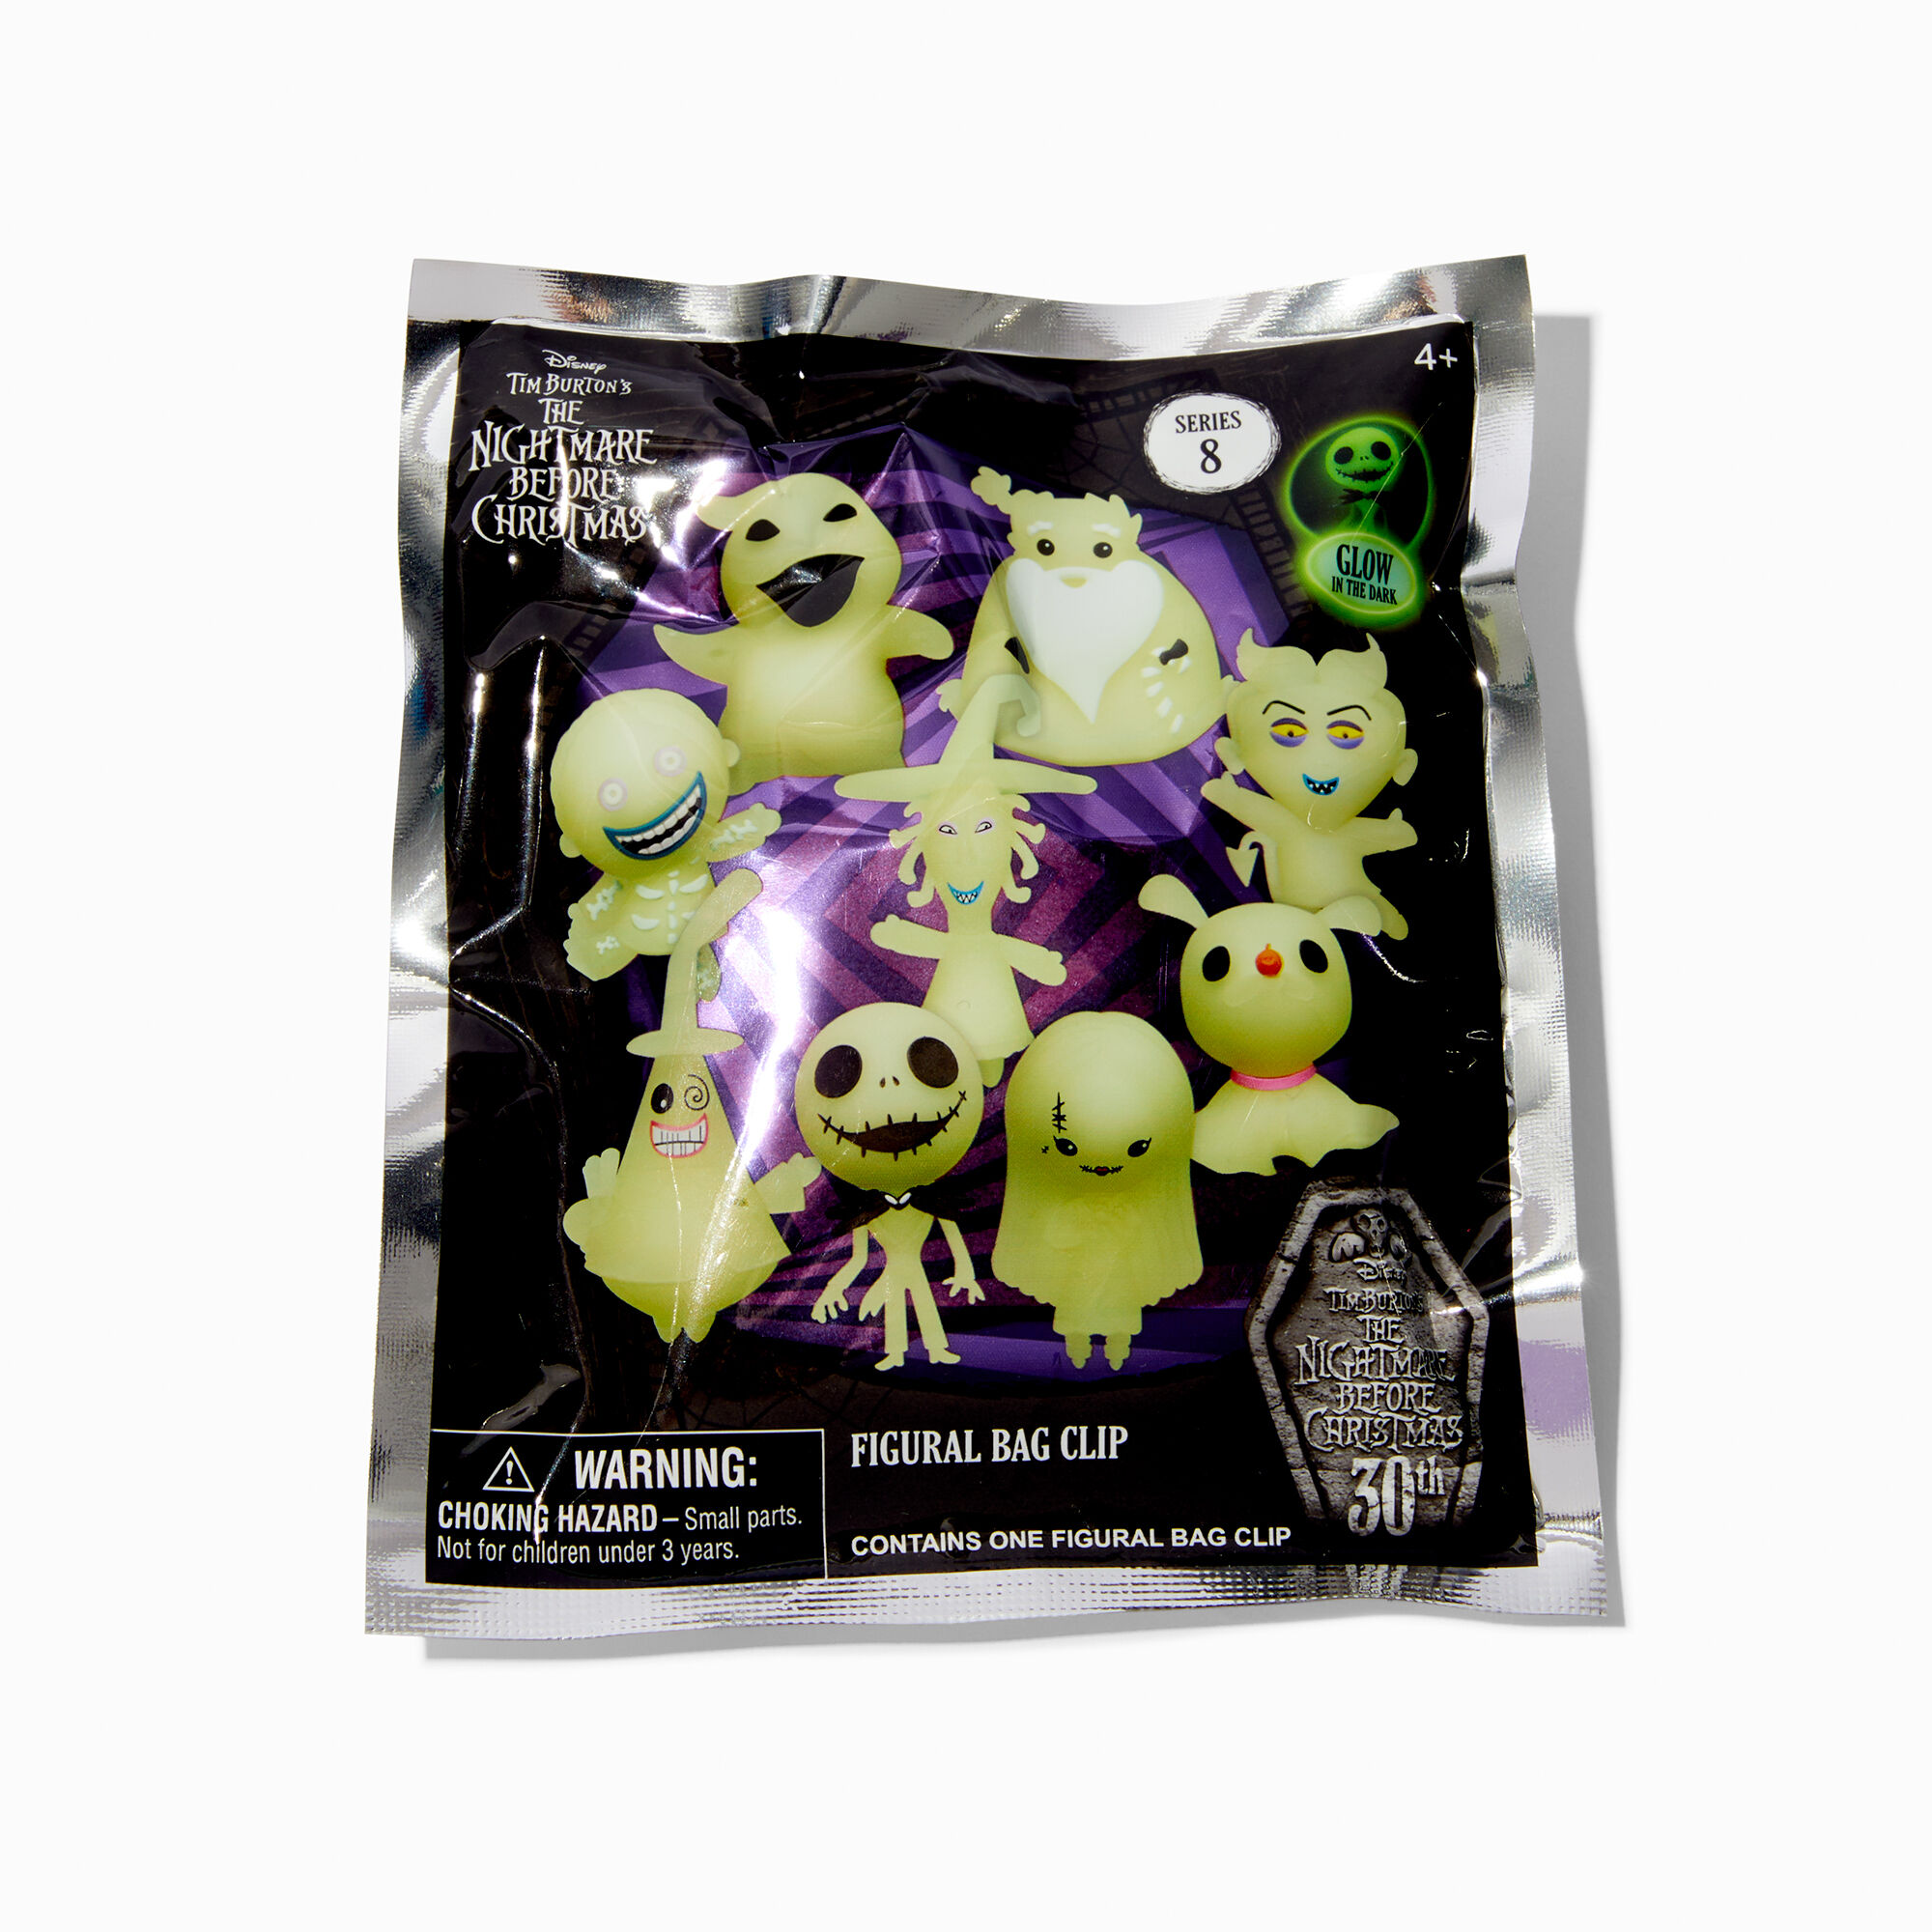 View Claires Disney The Nightmare Before Christmas Series 8 Figural Bag Clip Blind Styles Vary information